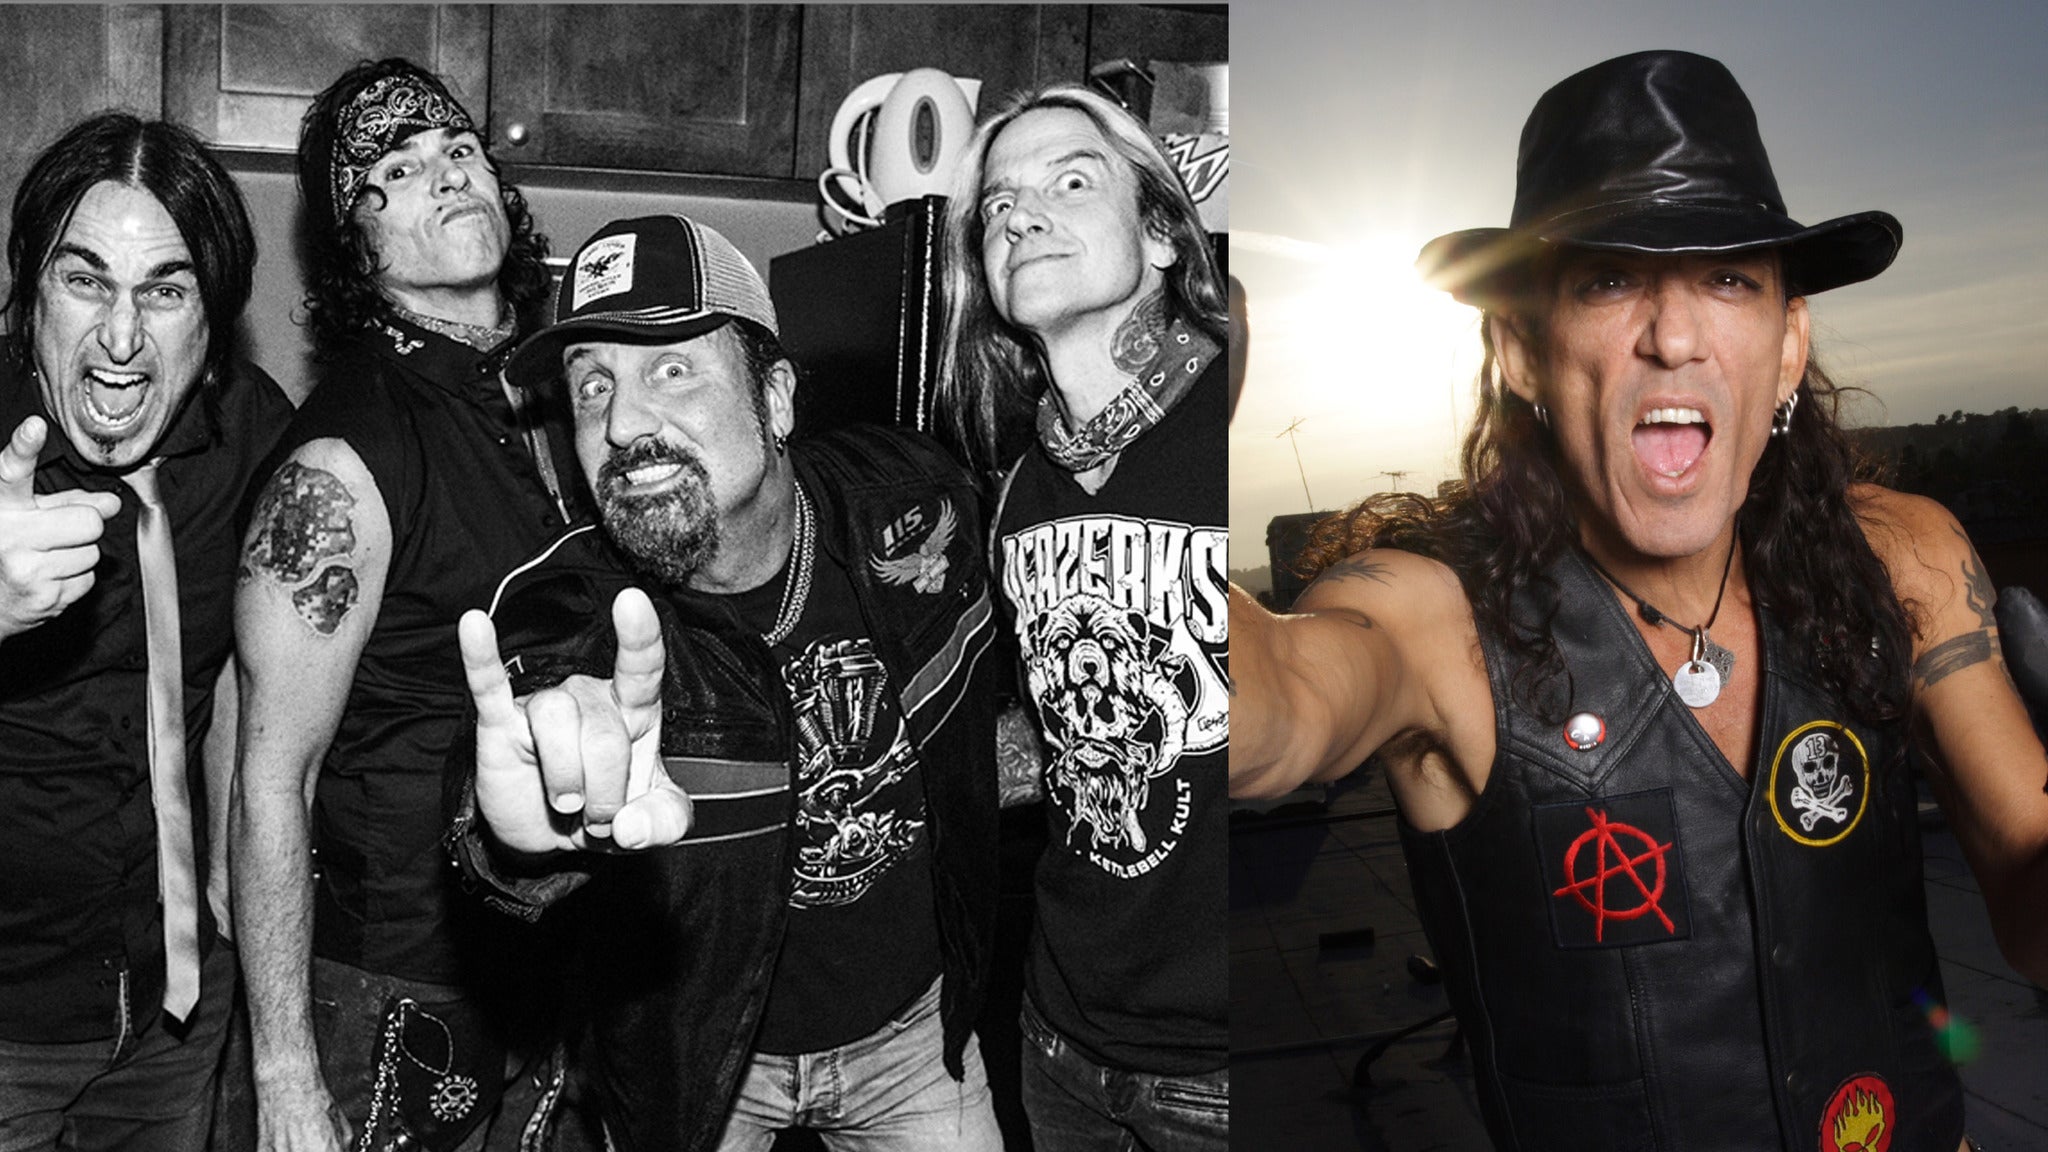 KSHE 95 Presents: Jackyl & Stephen Pearcy at The Factory